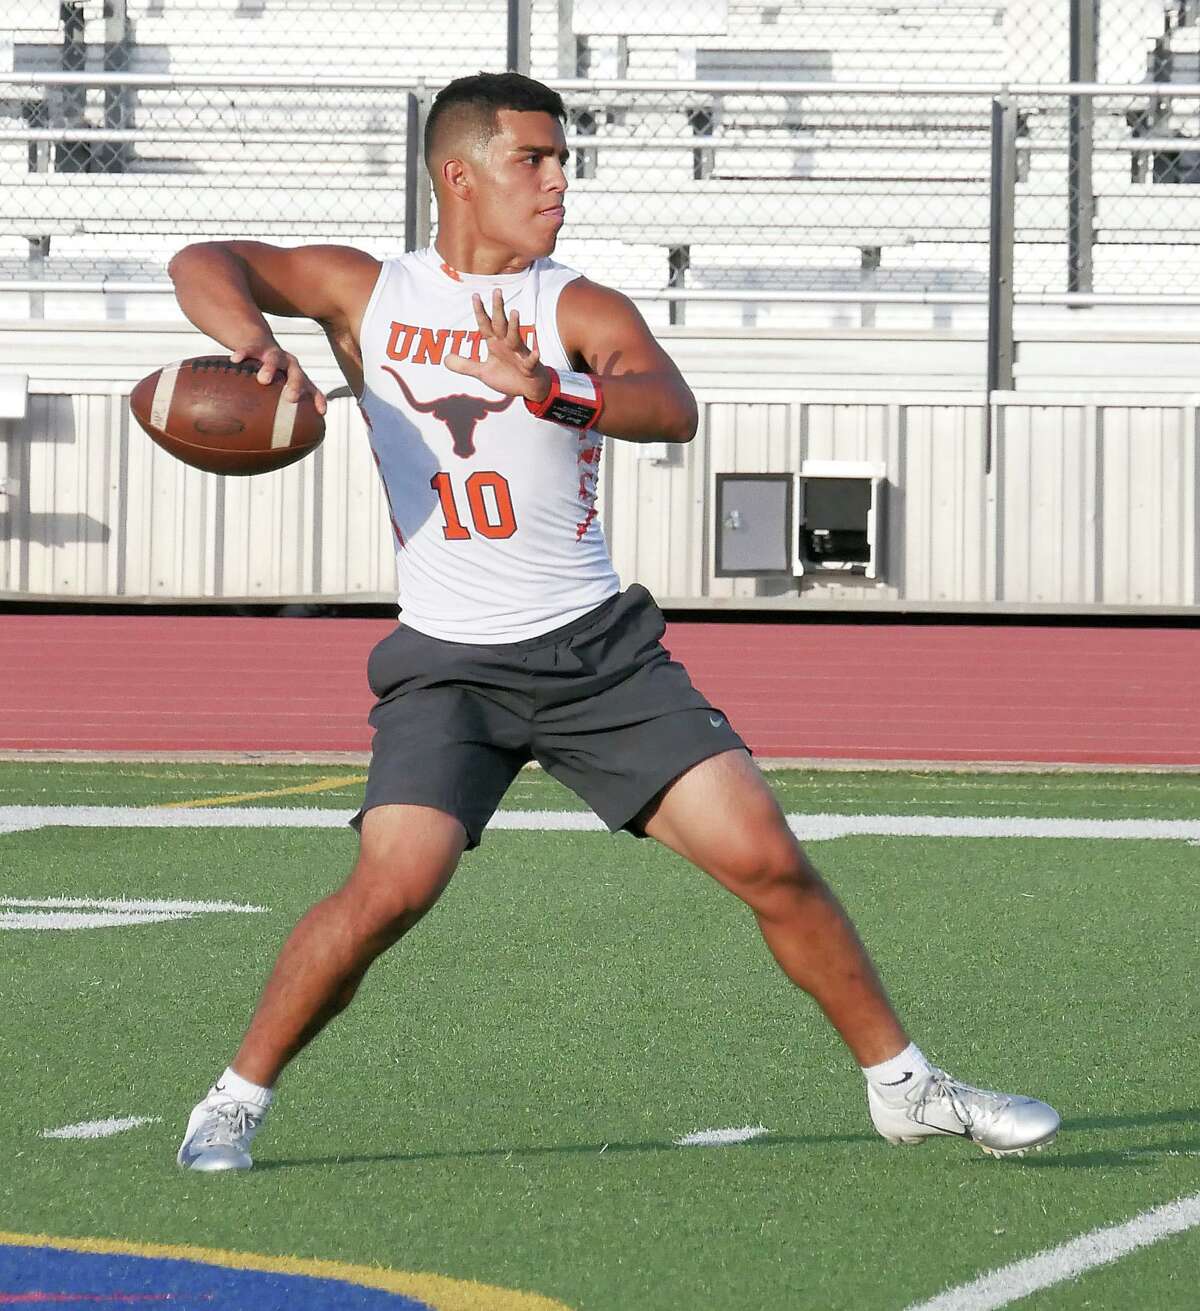 Wayo Huerta and United were eliminated Saturday by a 46-45 loss to Mission in the second round of the Division I consolation bracket at the 7on7 State Championships.